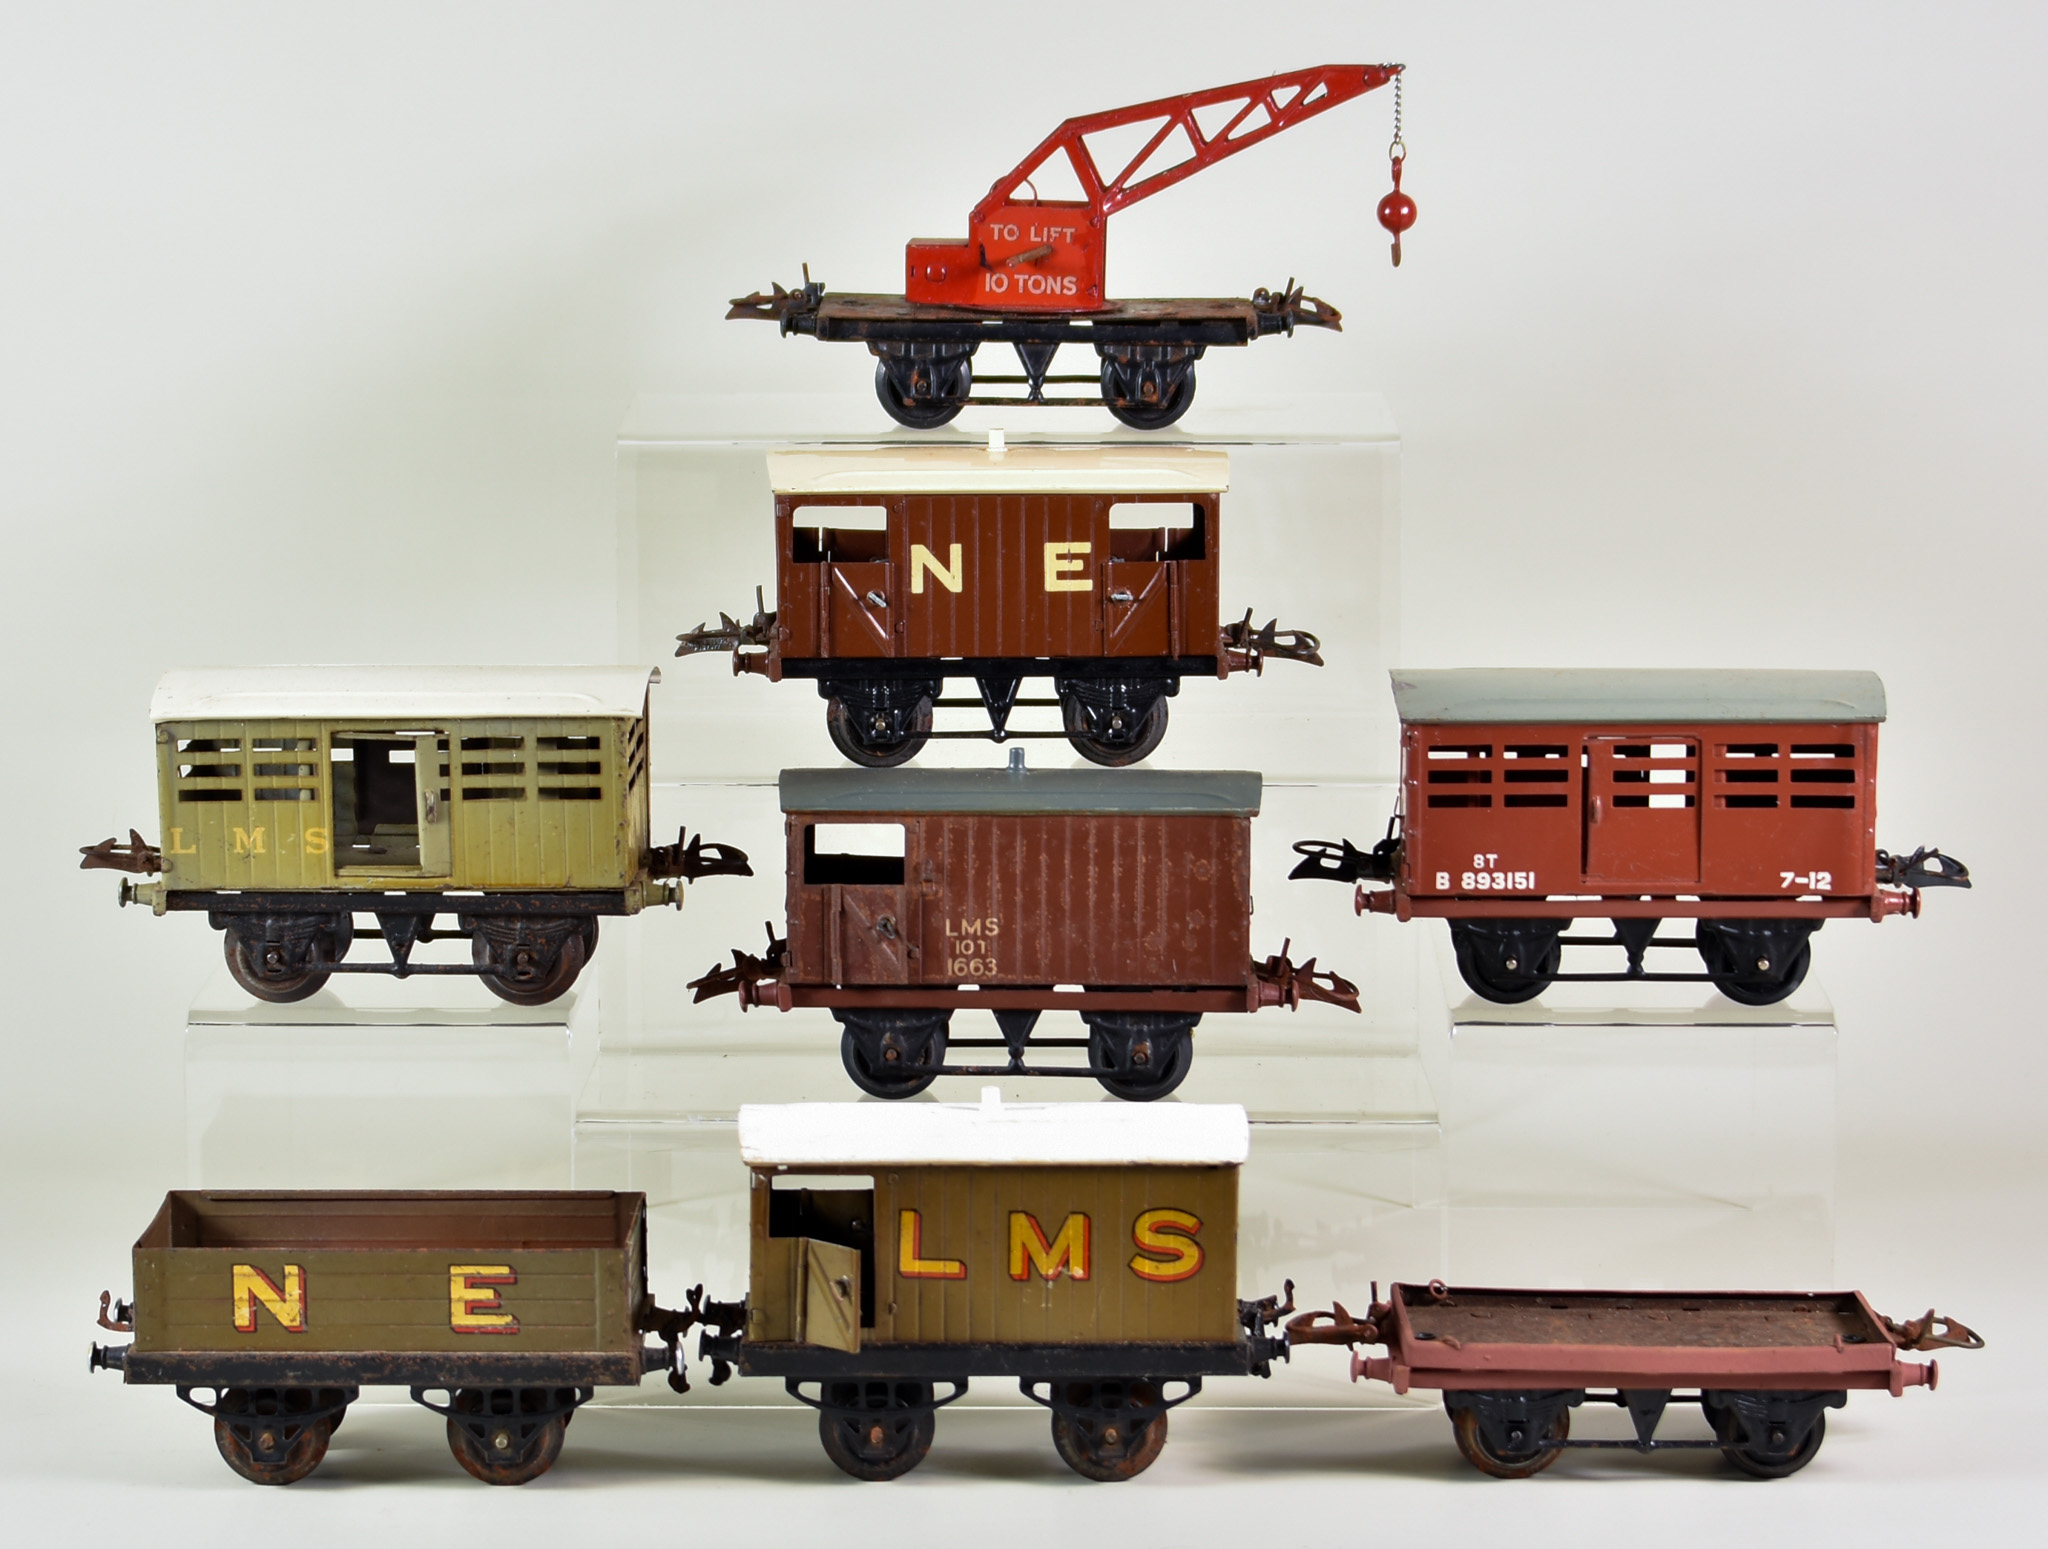 A Quantity of "O" Gauge Tin Plate Wagons, by Hornby, comprising - twelve open goods wagons (